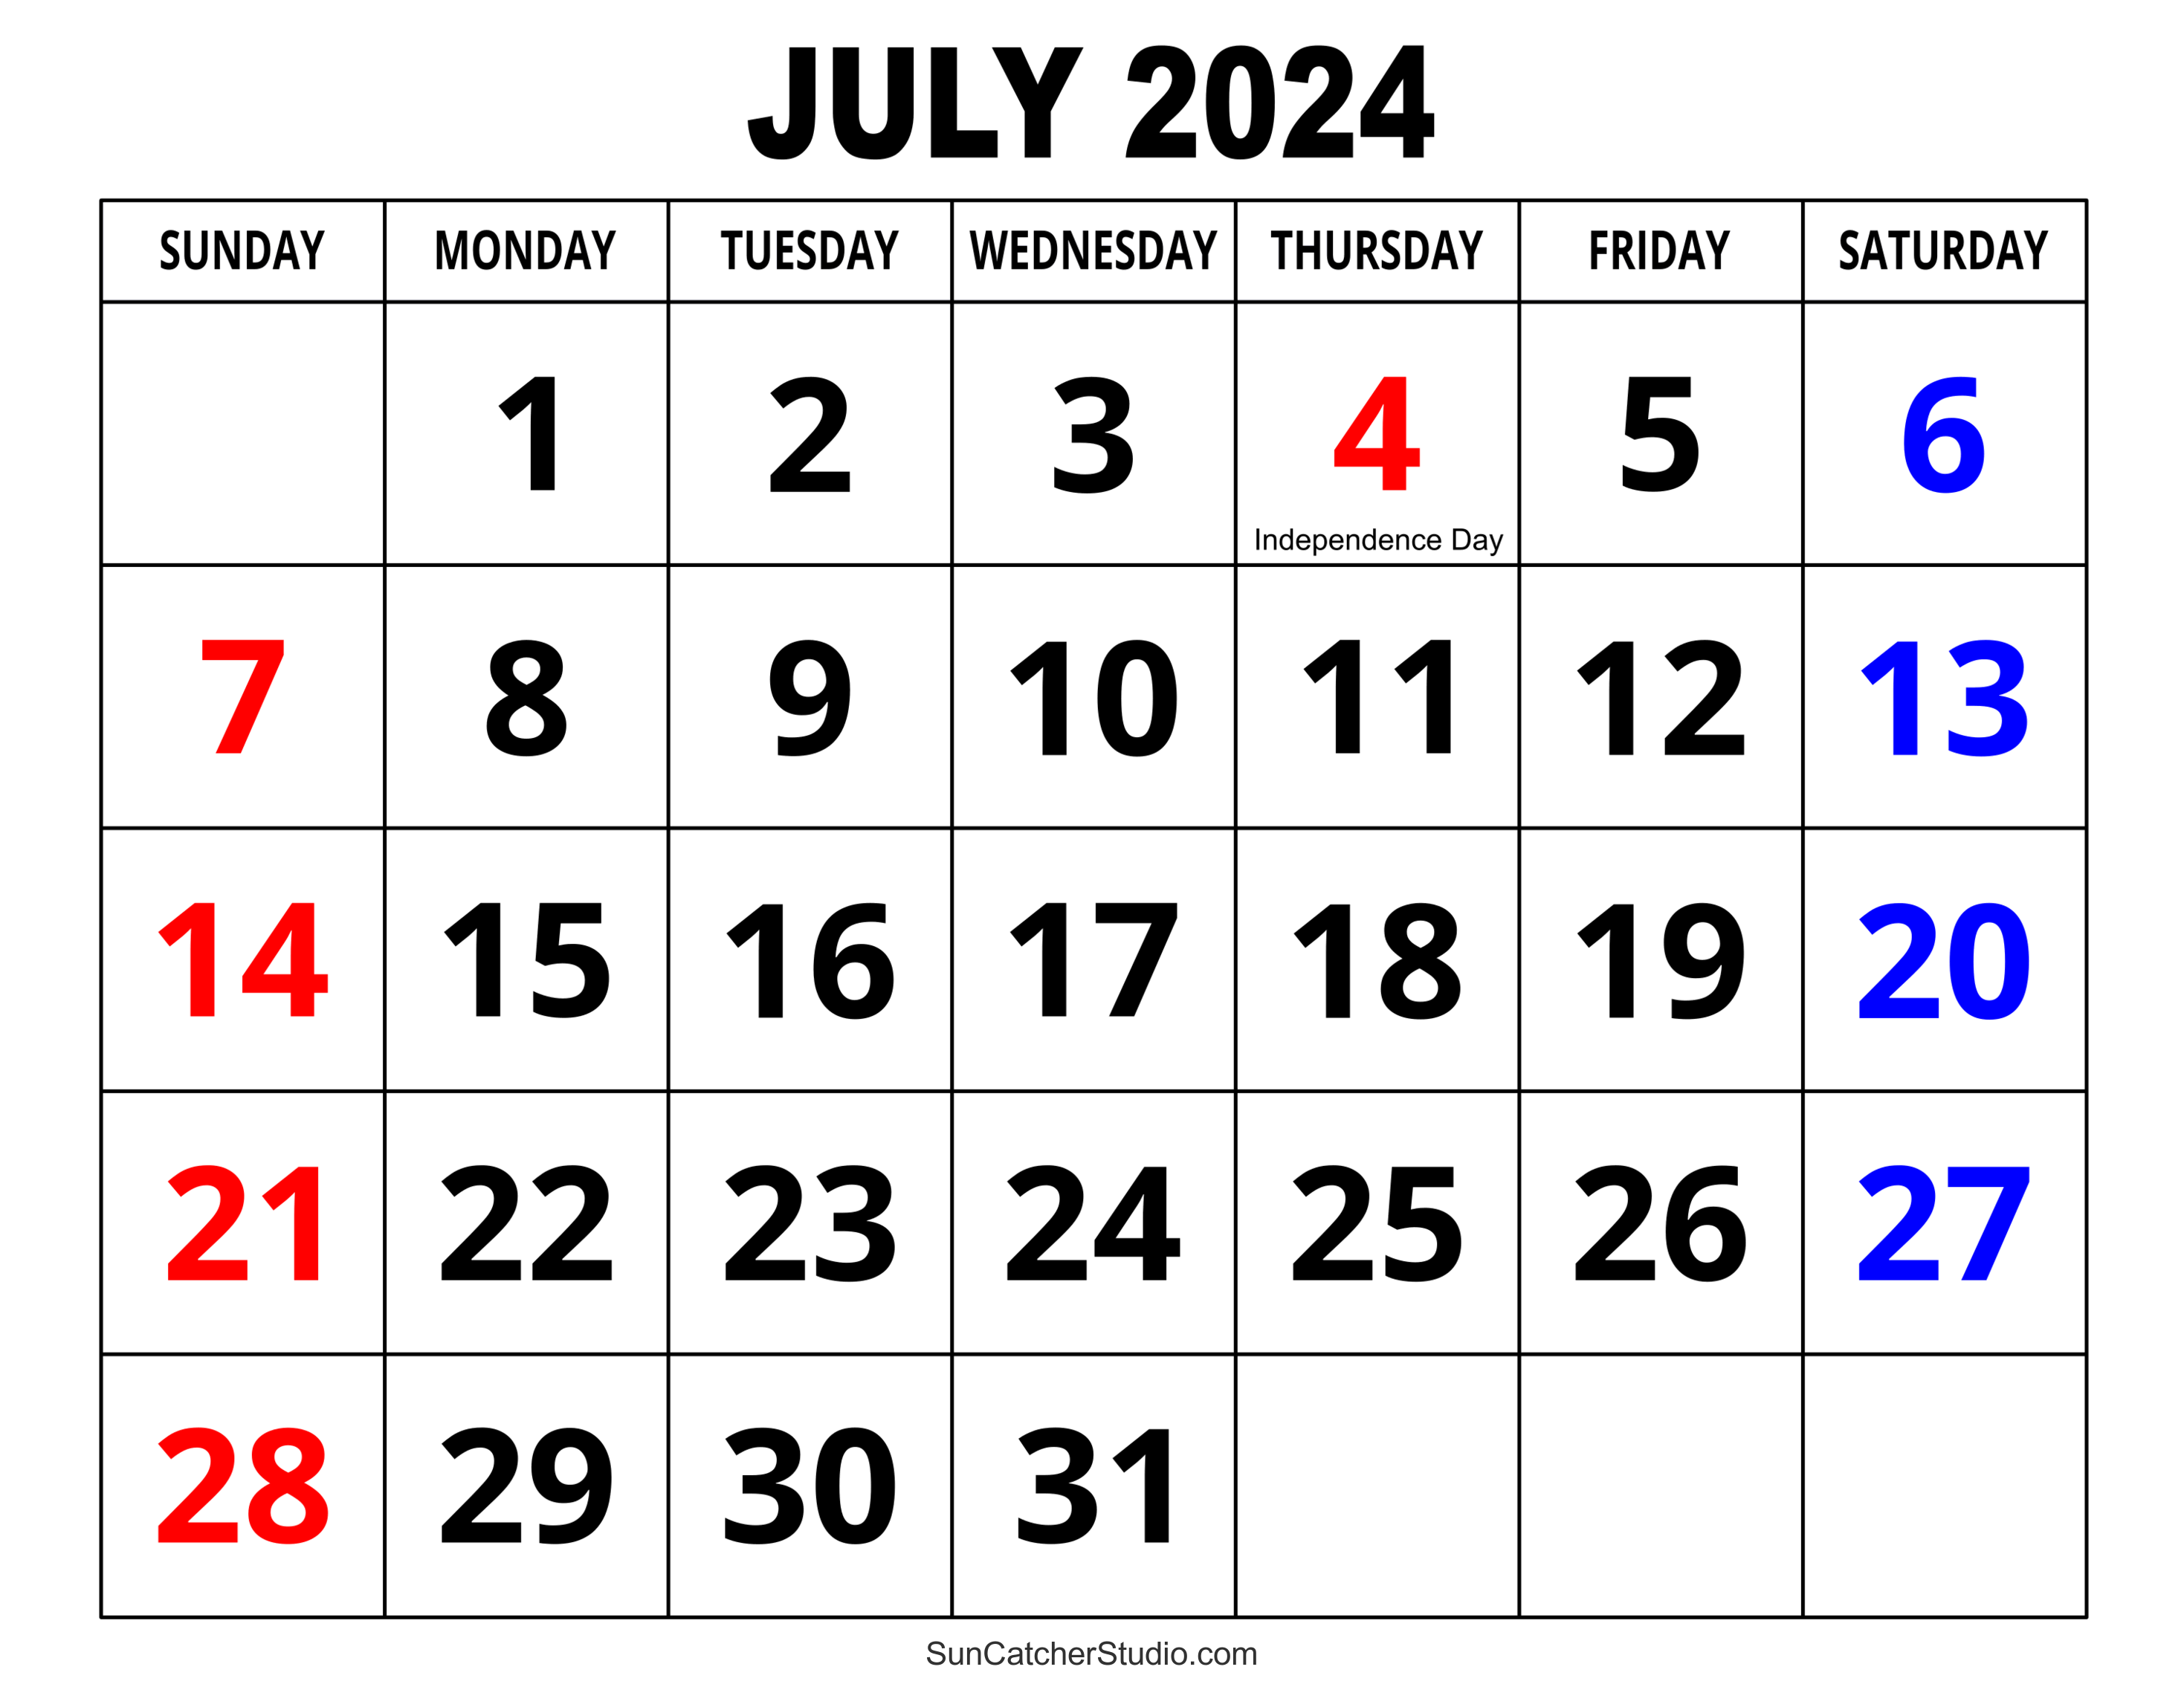 July 2024 Calendar (Free Printable) – Diy Projects, Patterns intended for July 20th Holiday Calendar 2024